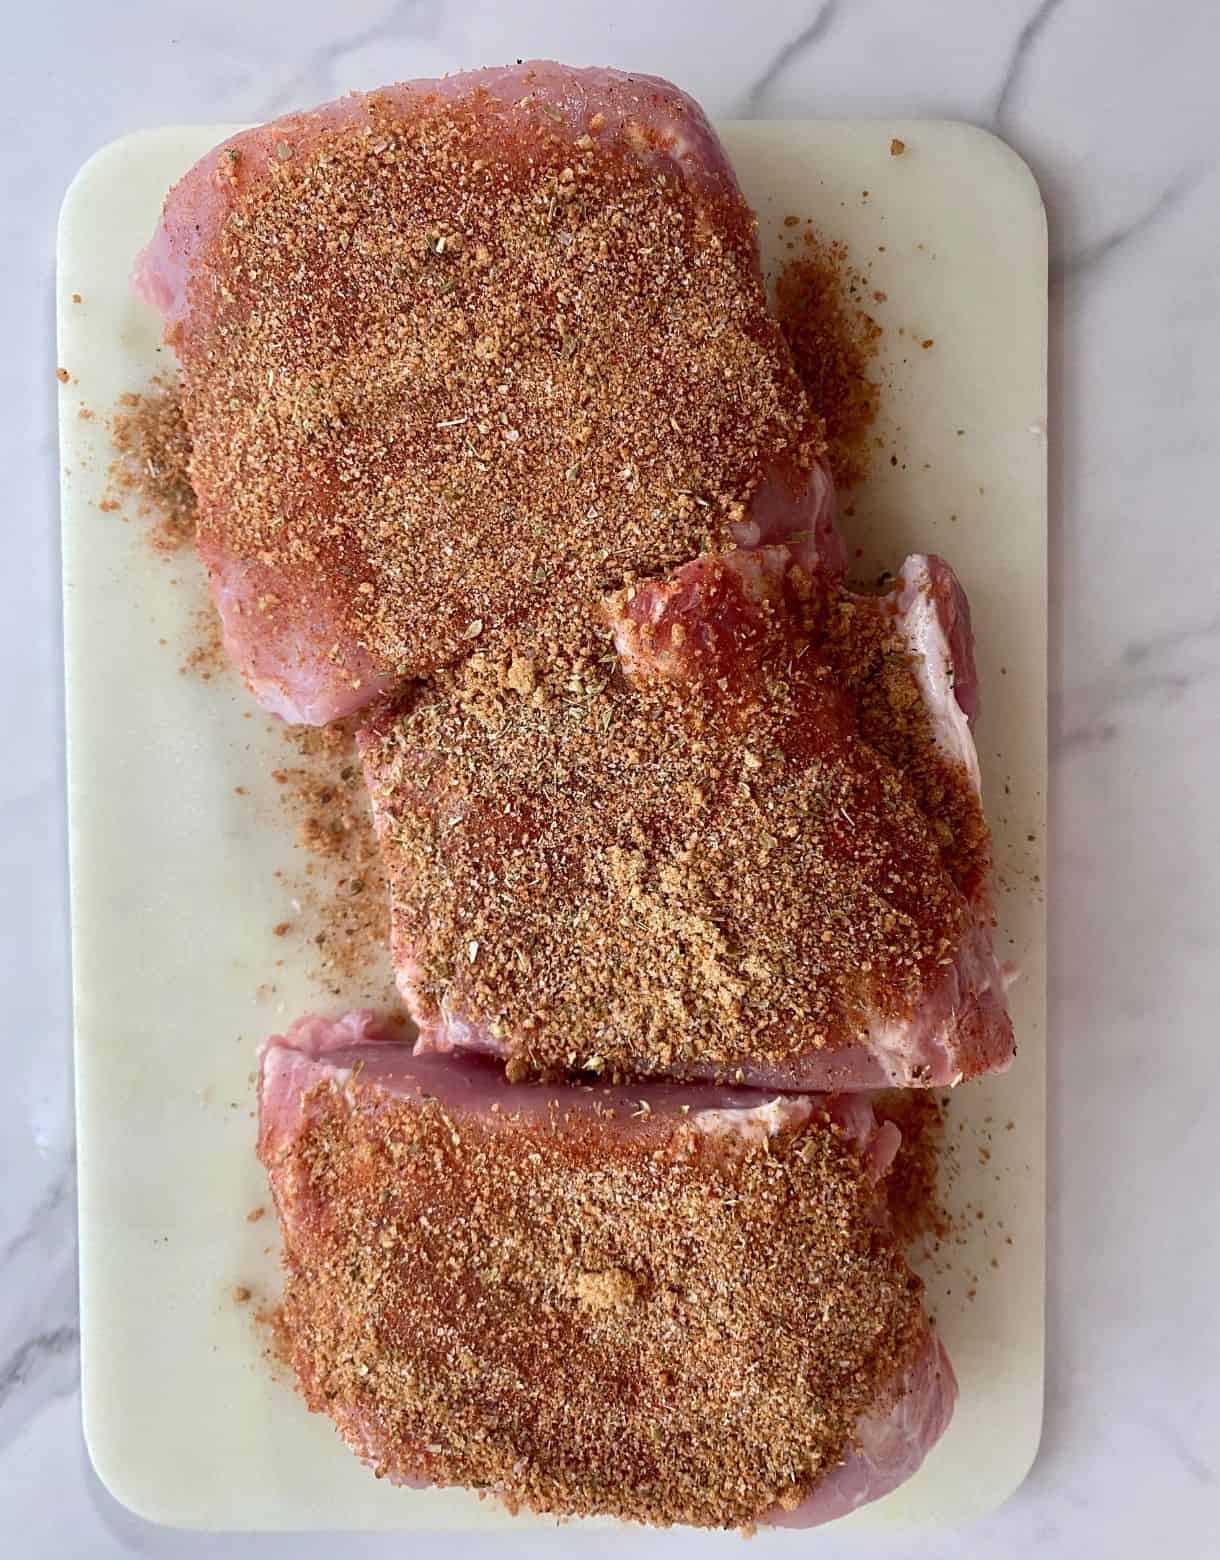 Three pieces of pork loin on a cutting board and rubbed with spices.